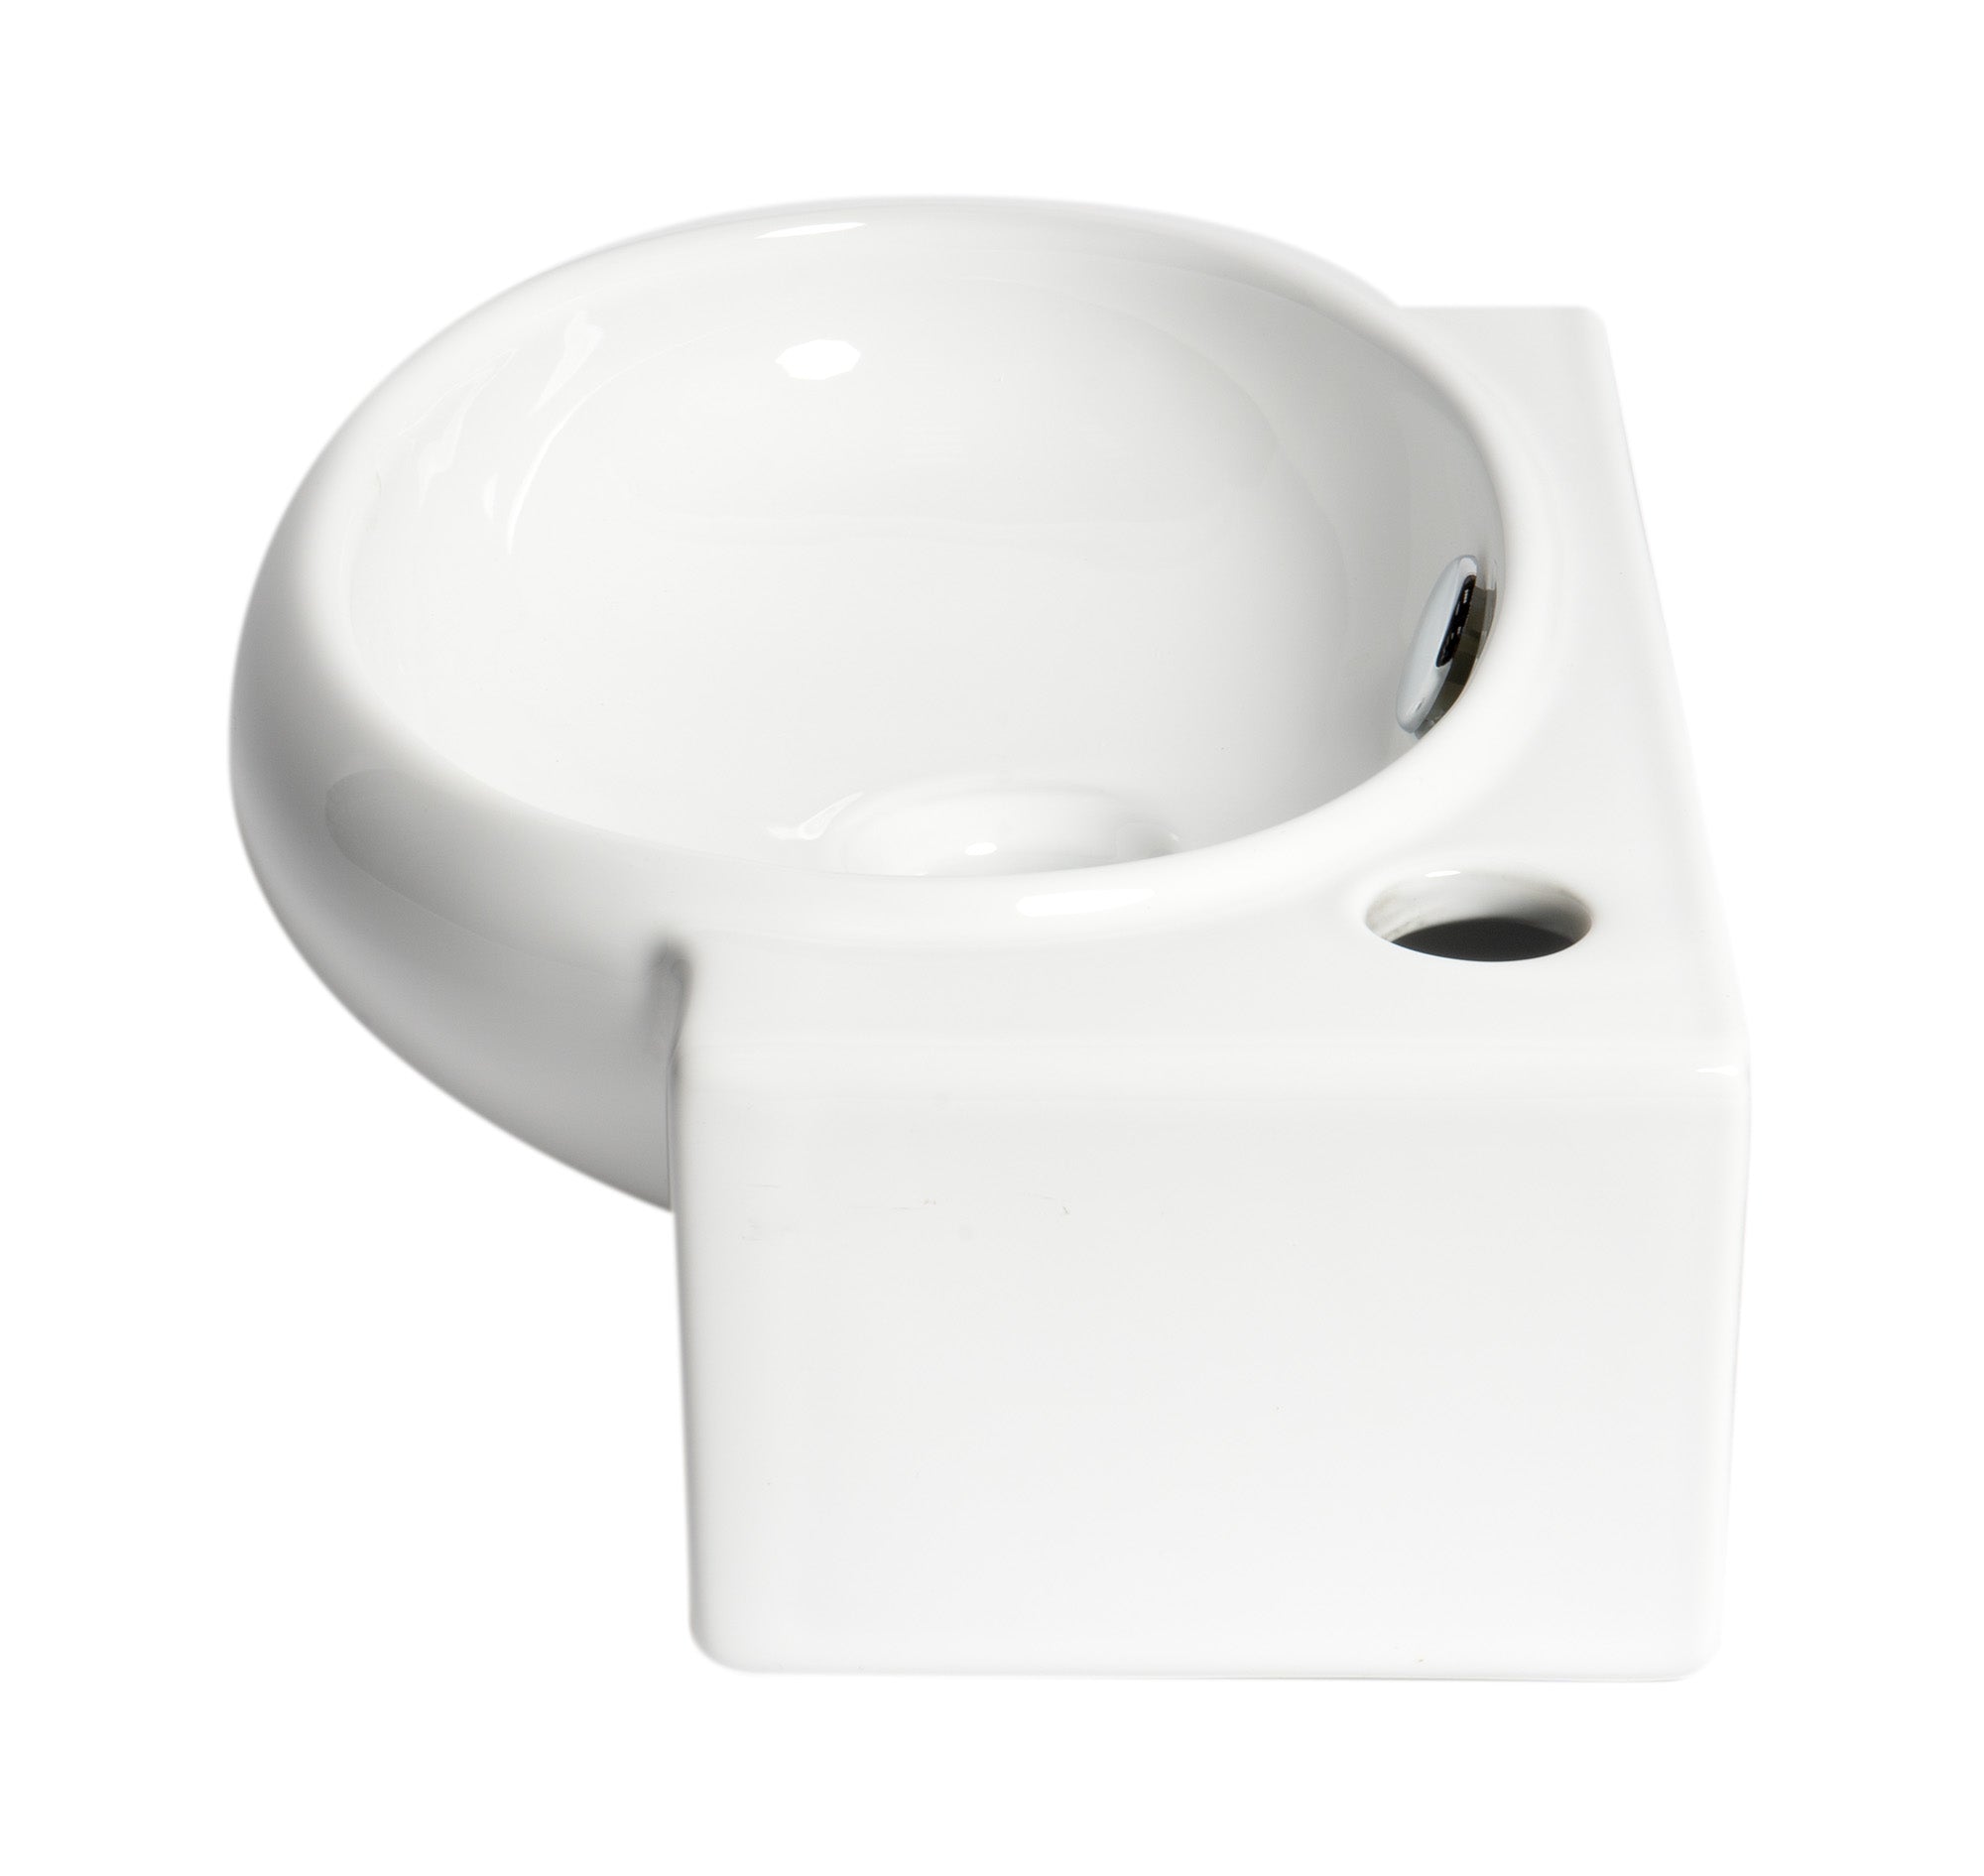 ALFI Brand - White 17" Small Wall Mounted Ceramic Sink with Faucet Hole | ABC117